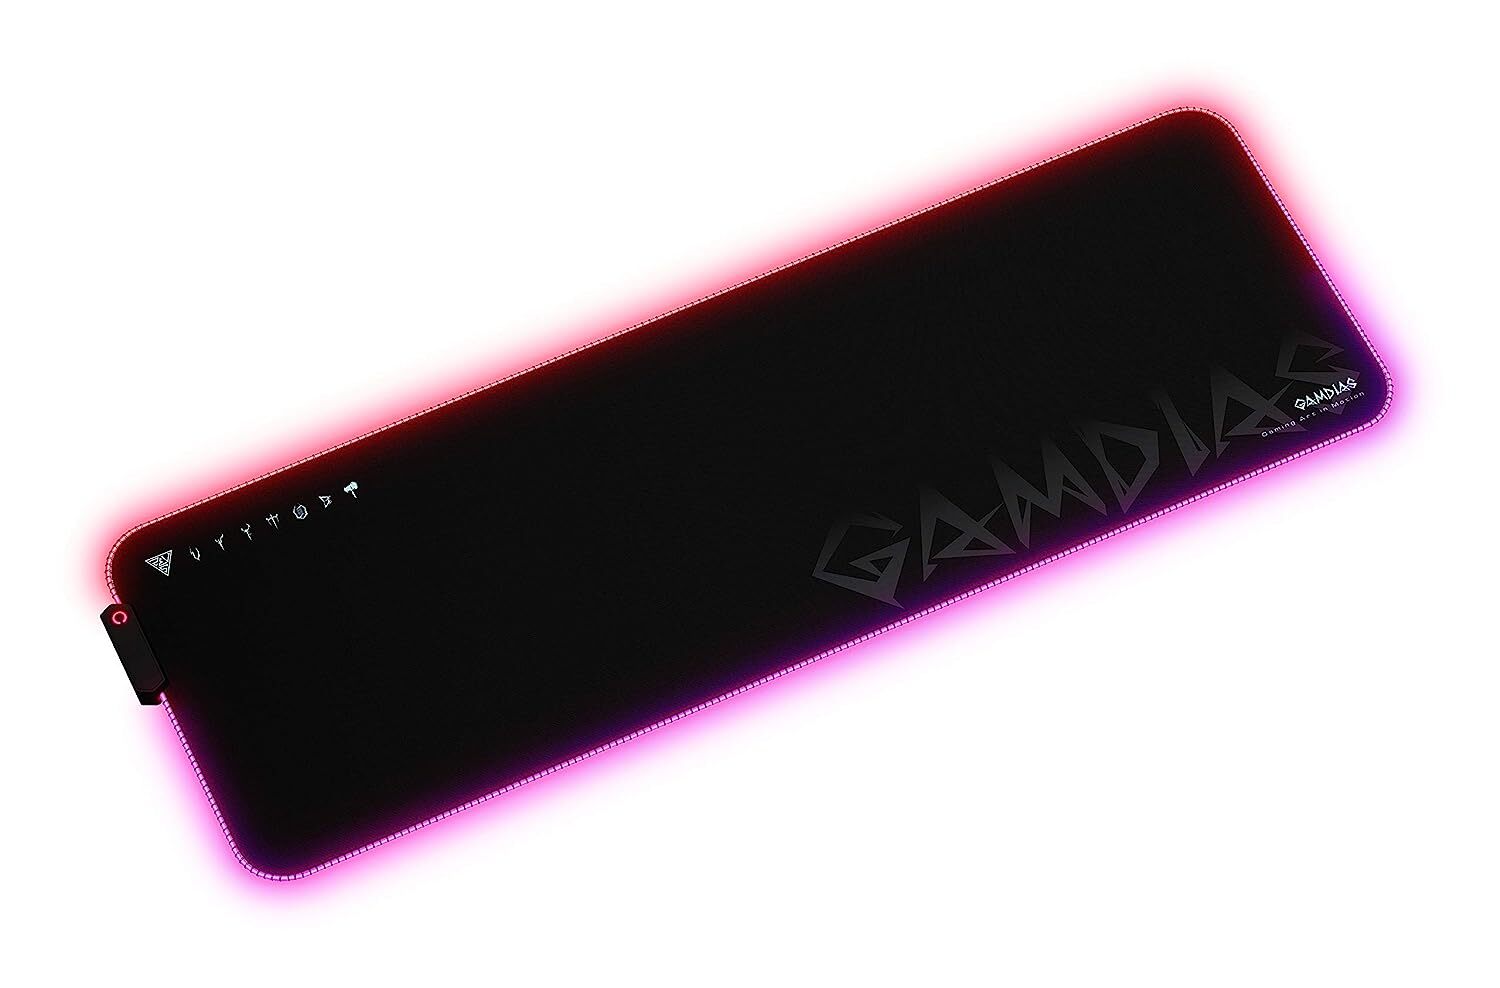 Gamdias NYX P3 ARGB Gaming Mouse Pad with 10 Addressable Multi-Colored Lighting Effects and Non-Slip Rubber Base